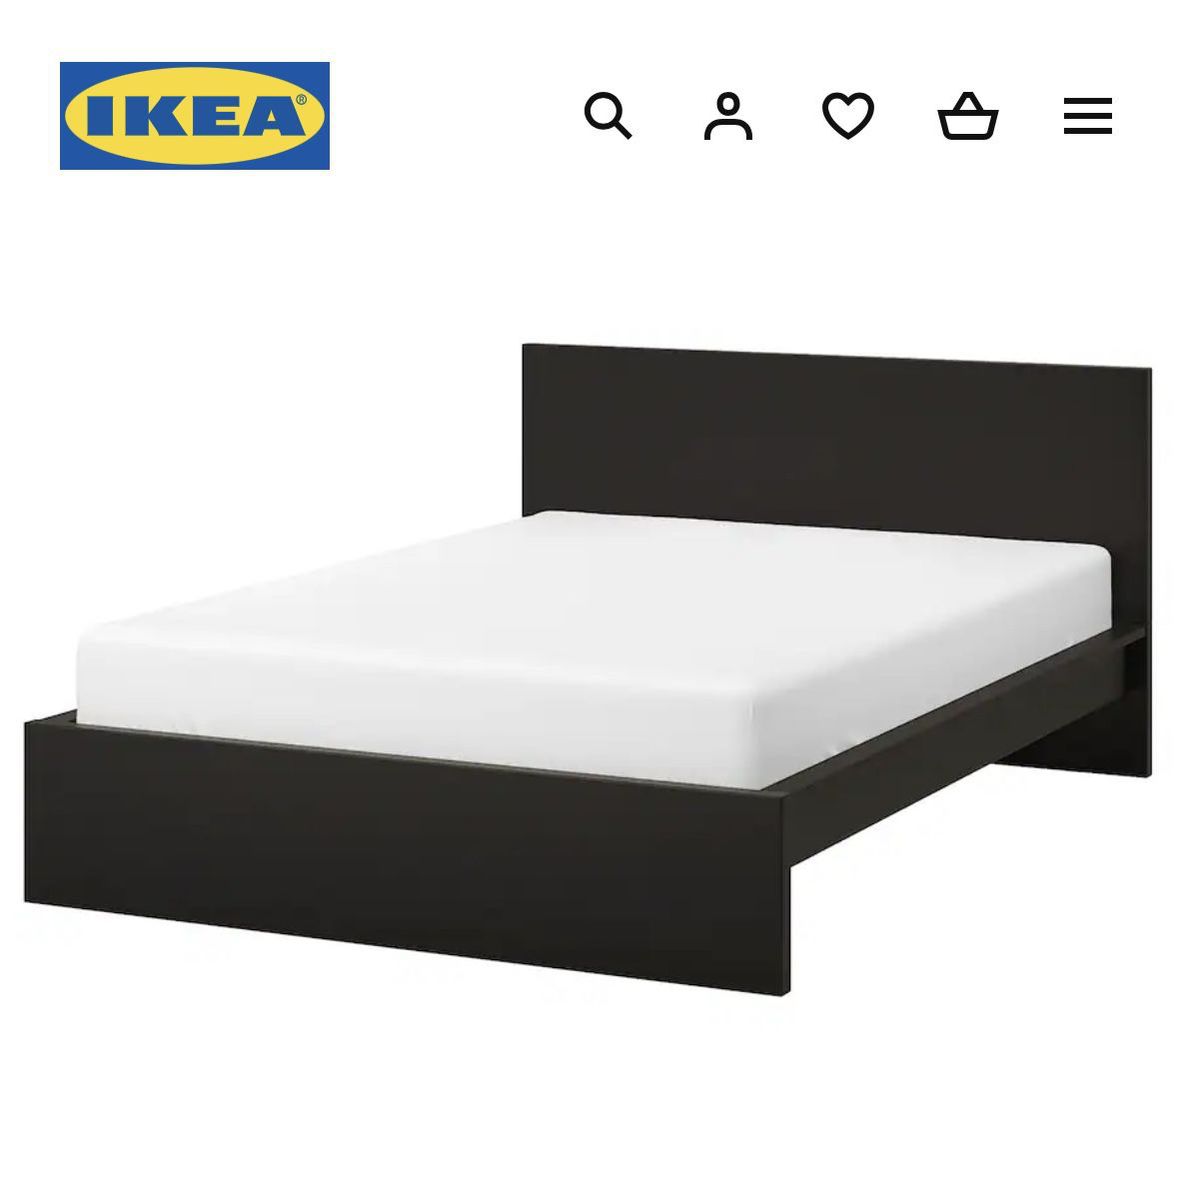 IKEA Malm Bed Frame Size Full